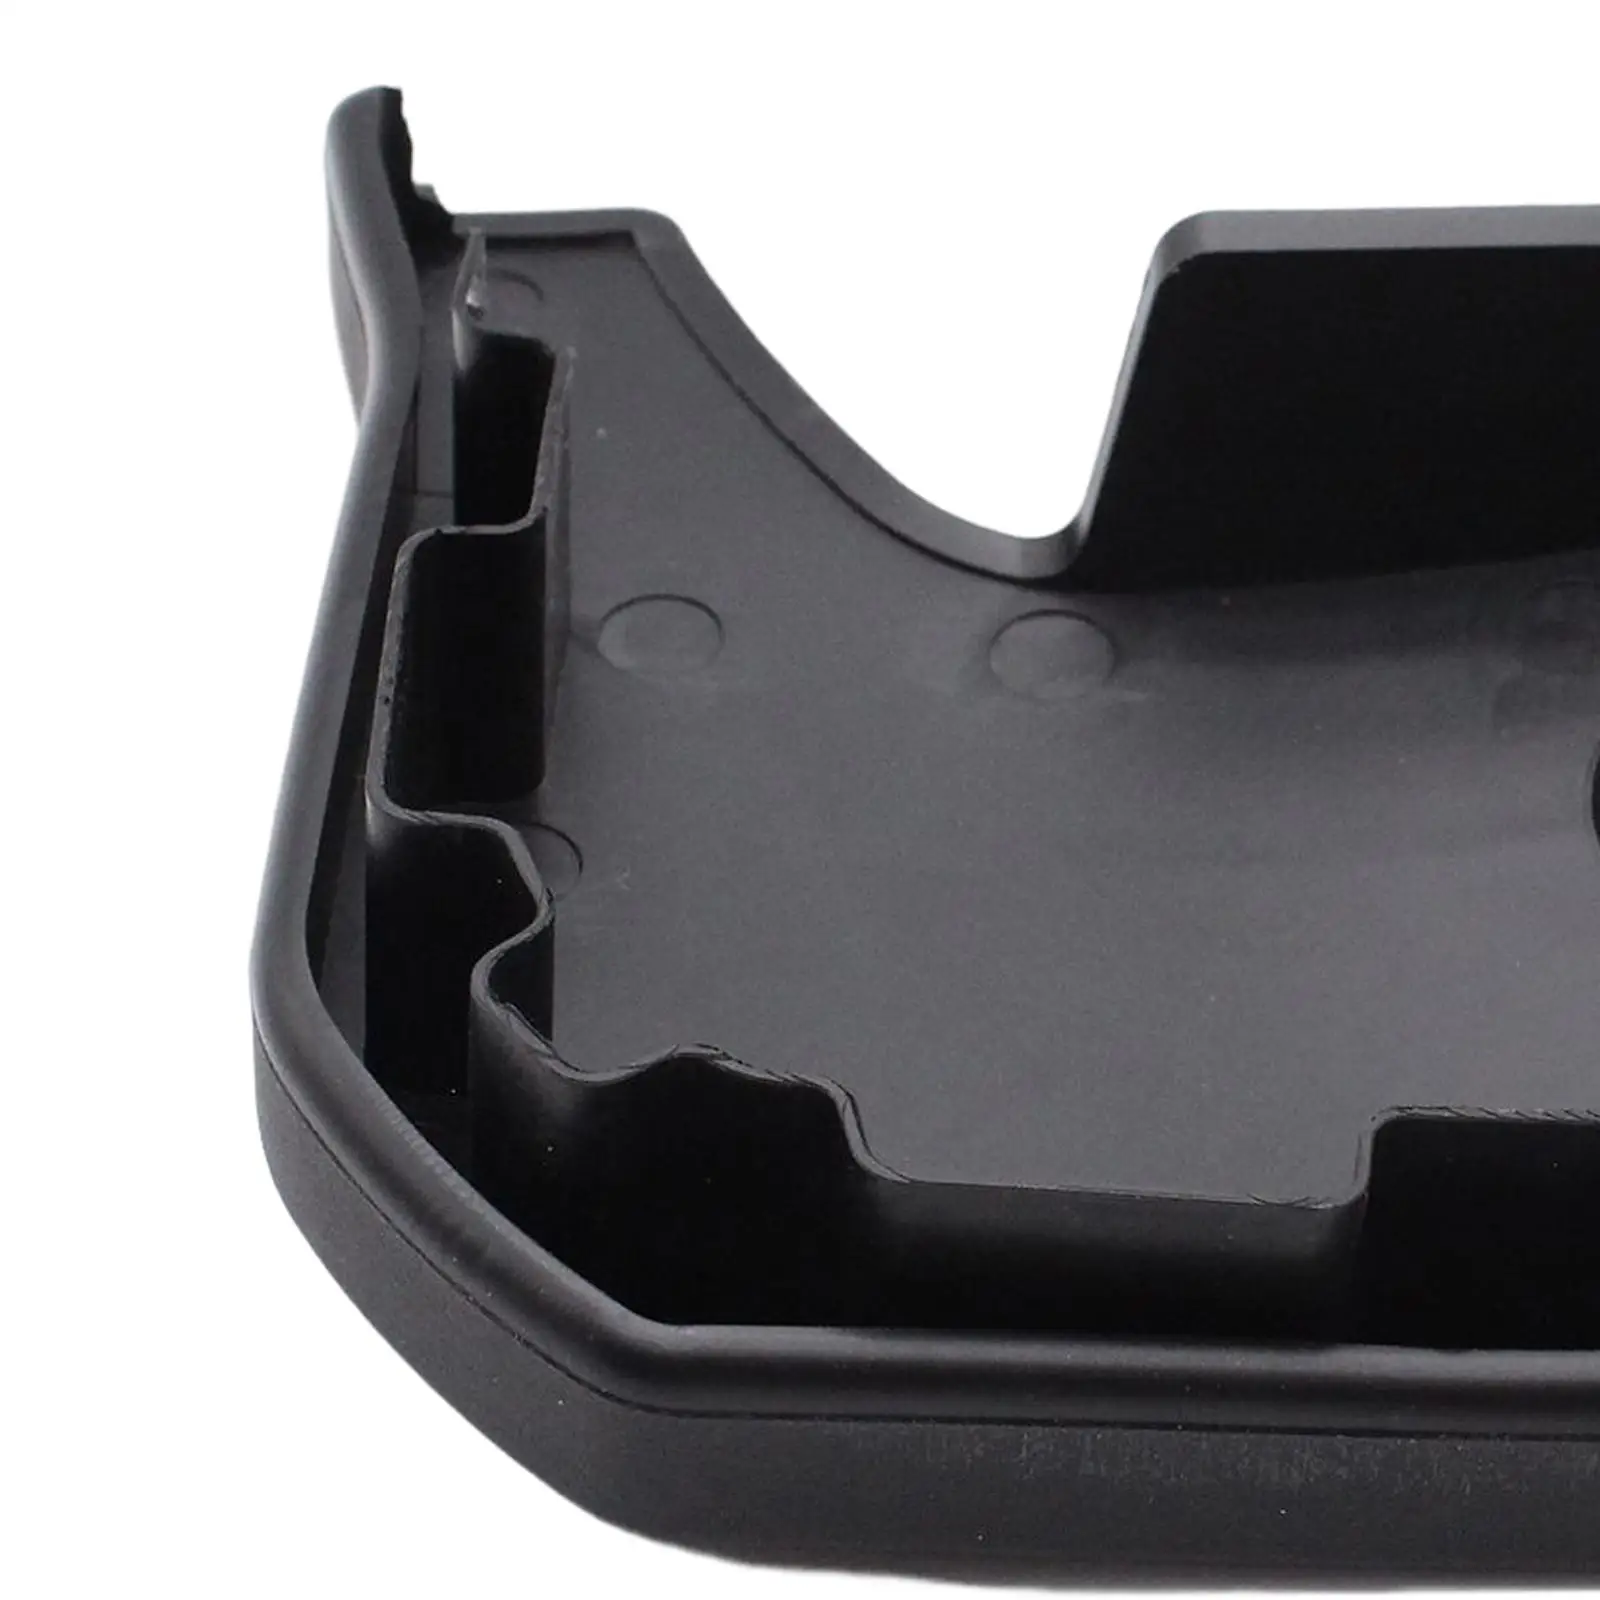 Car Front Side Skirt End Cover Caps C1Bj10175AC 1877700 Fits for Ford Fiesta 3 Door Parts